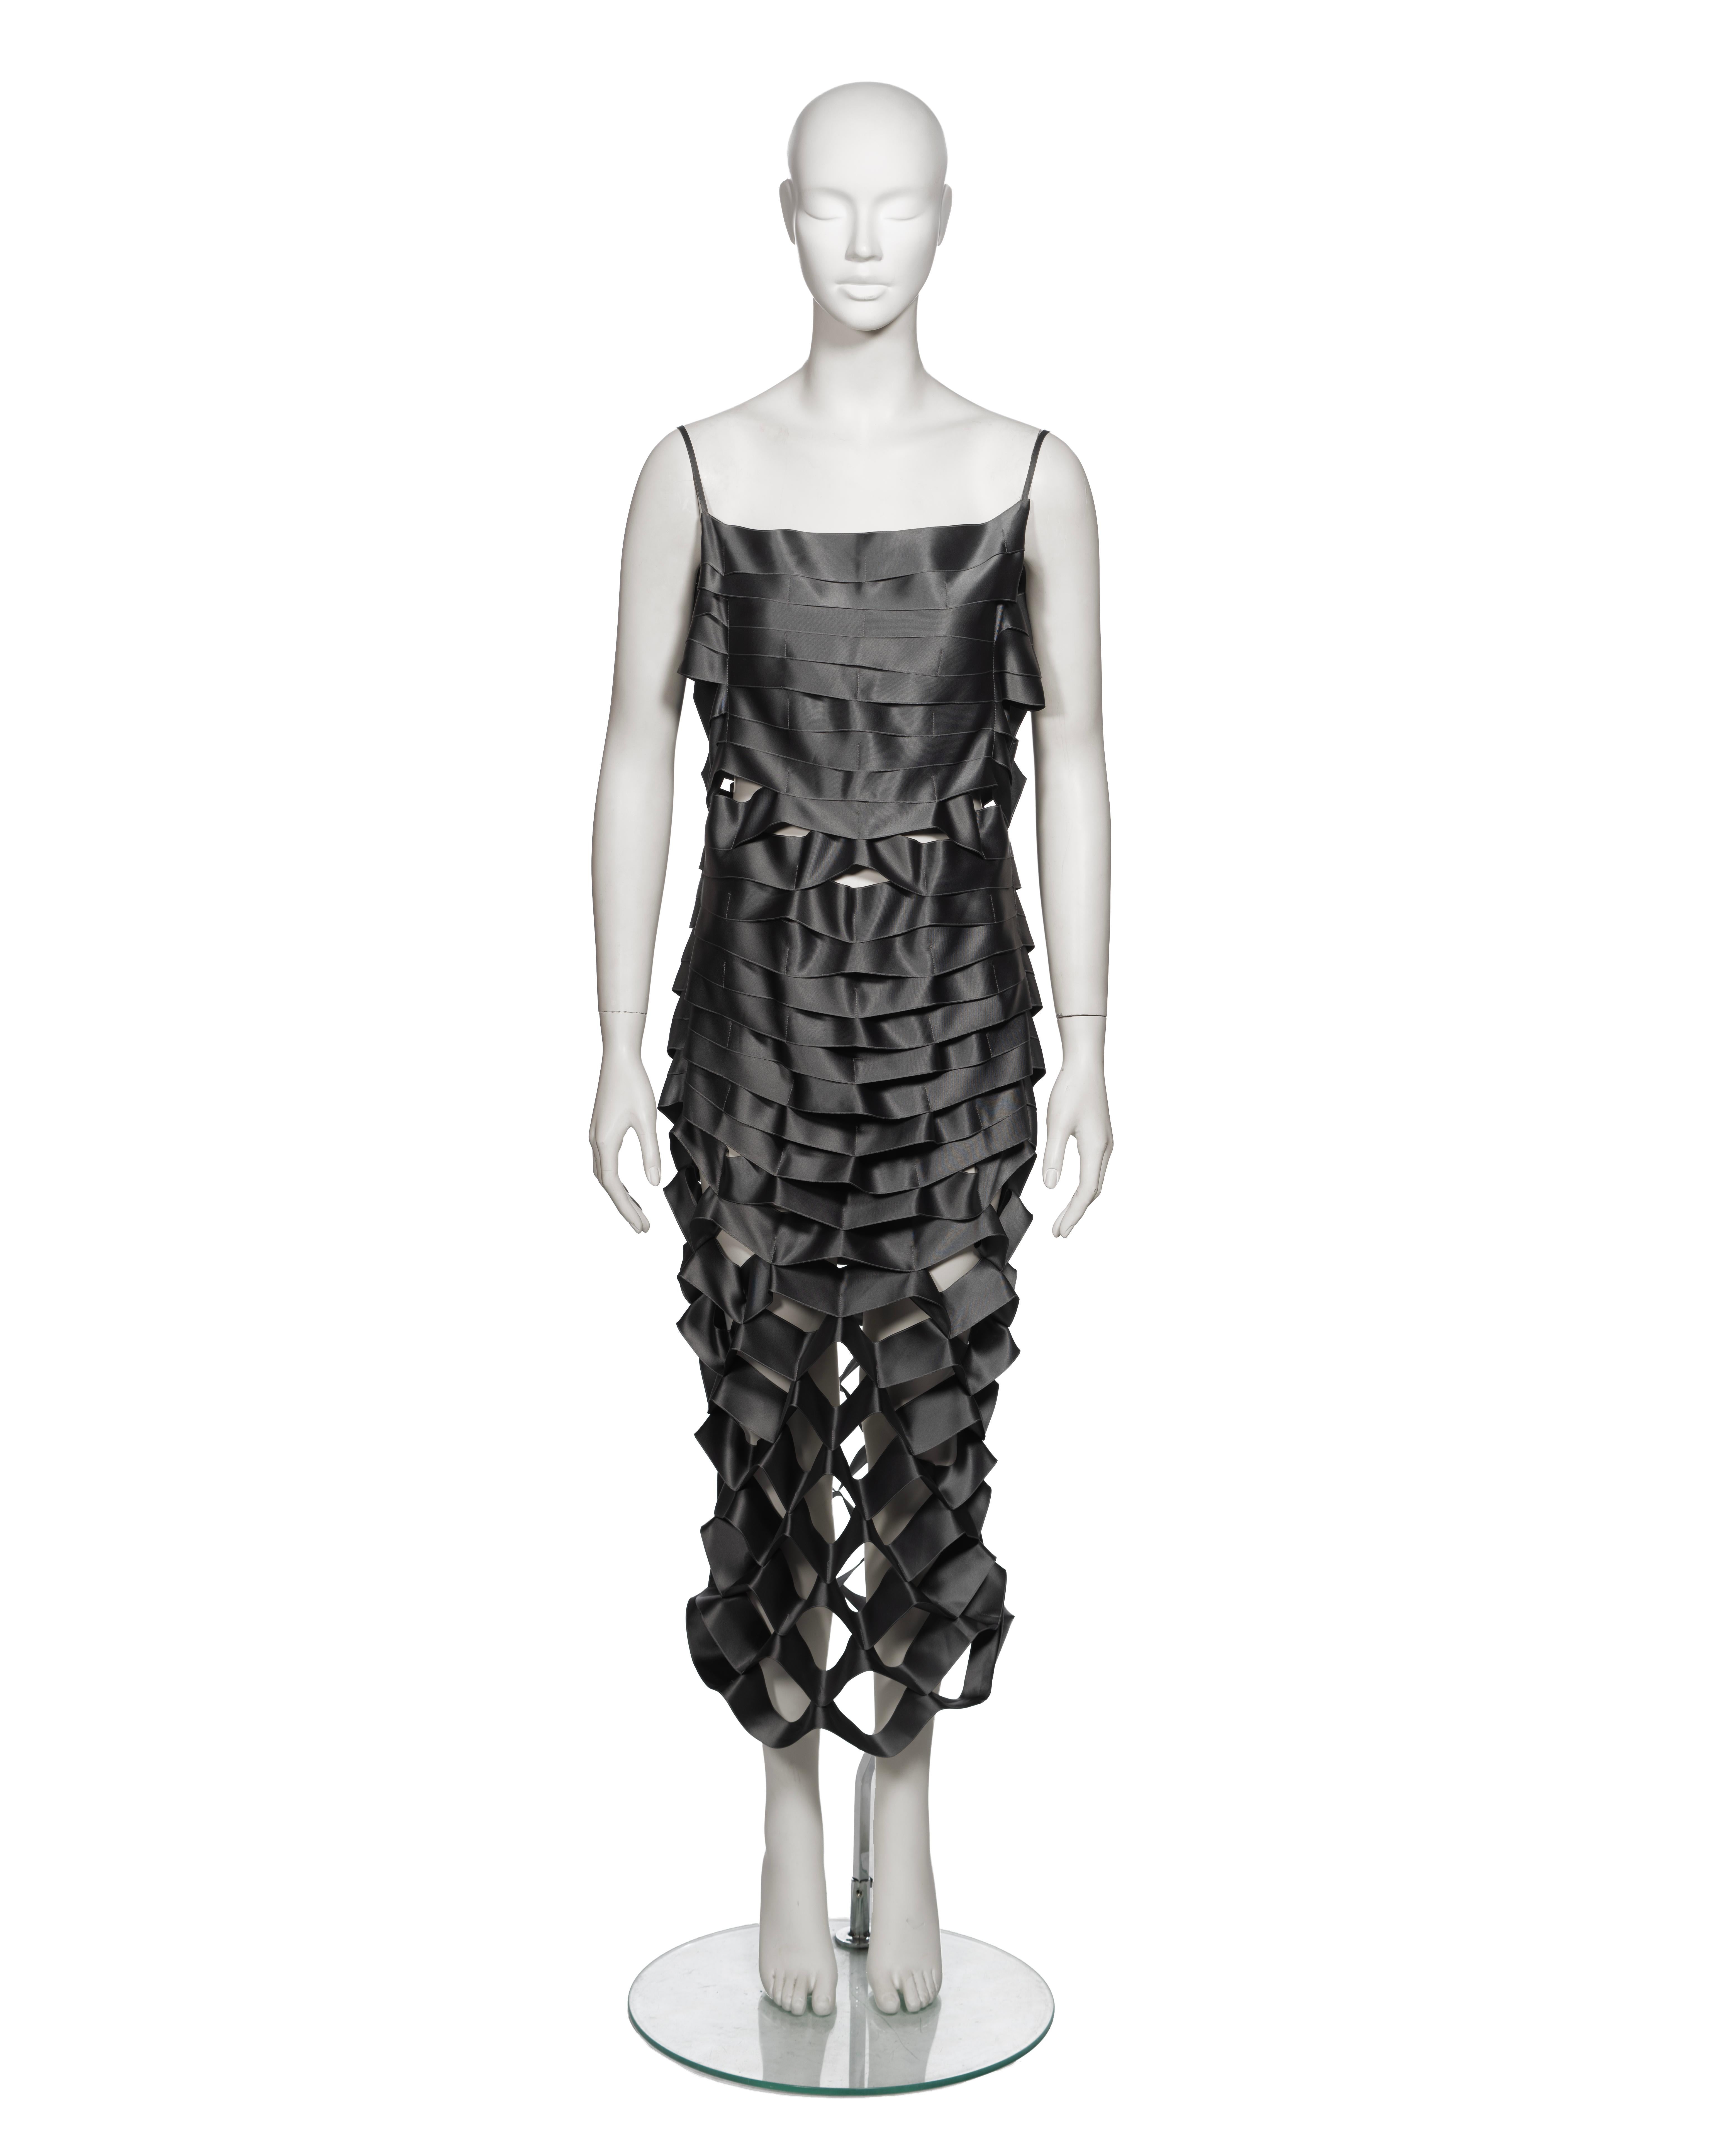 ▪ Archival Helmut Lang 'Ribbon' Dress
▪ Creative Director: Helmut Lang
▪ Spring-Summer 1998
▪ Sold by One of a Kind Archive
▪ Museum Grade
▪ Entire construction crafted from gunmetal satin ribbon bands
▪ Ribbons intricately layered, gradually